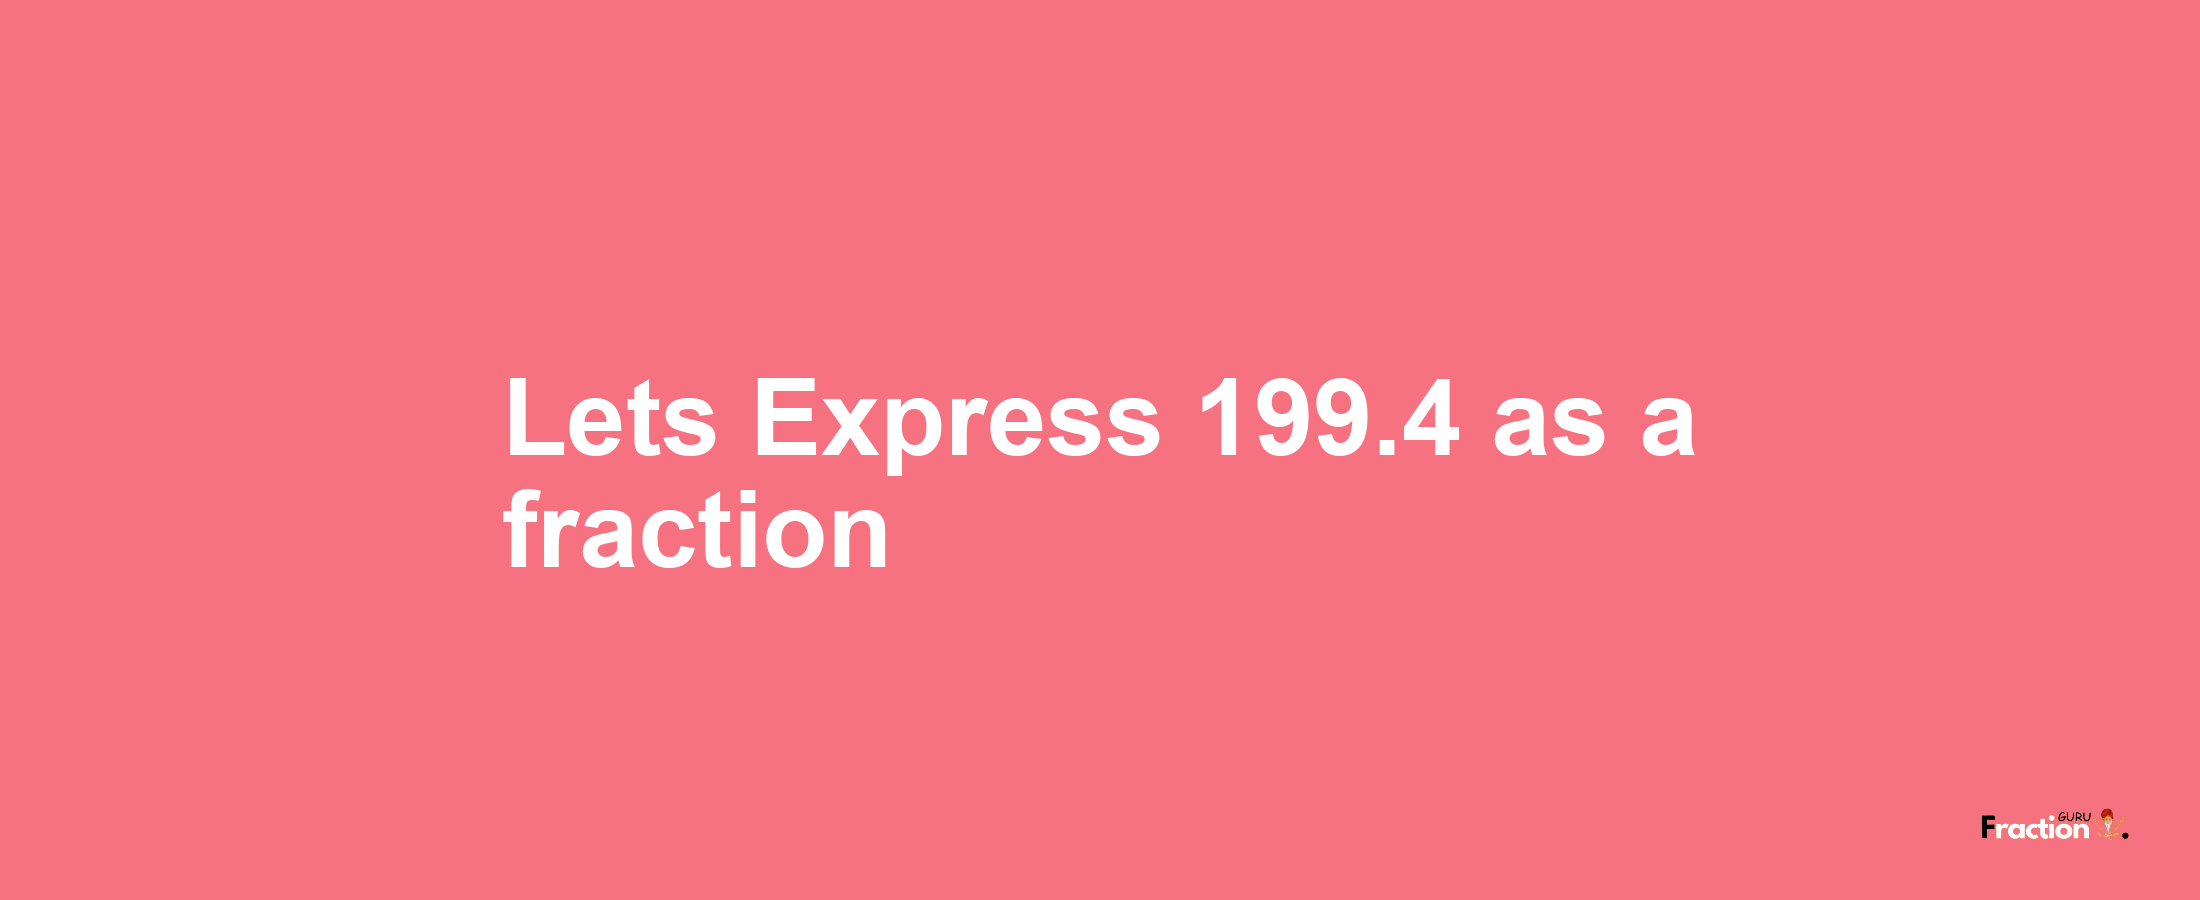 Lets Express 199.4 as afraction